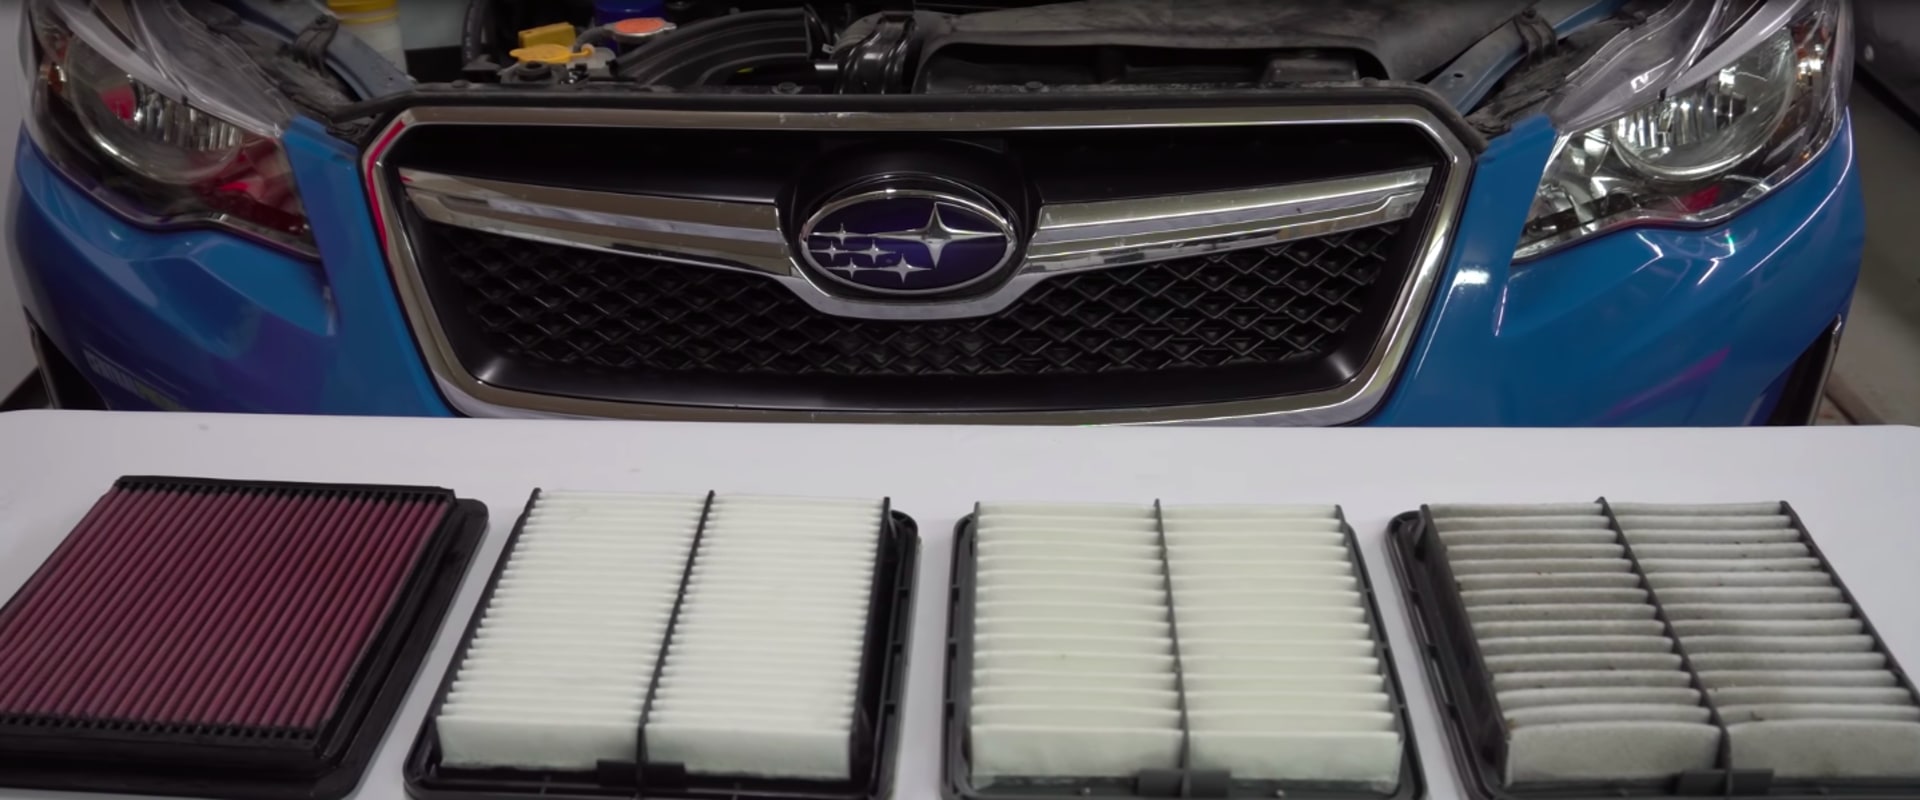 Do Better Car Air Filters Make a Difference?